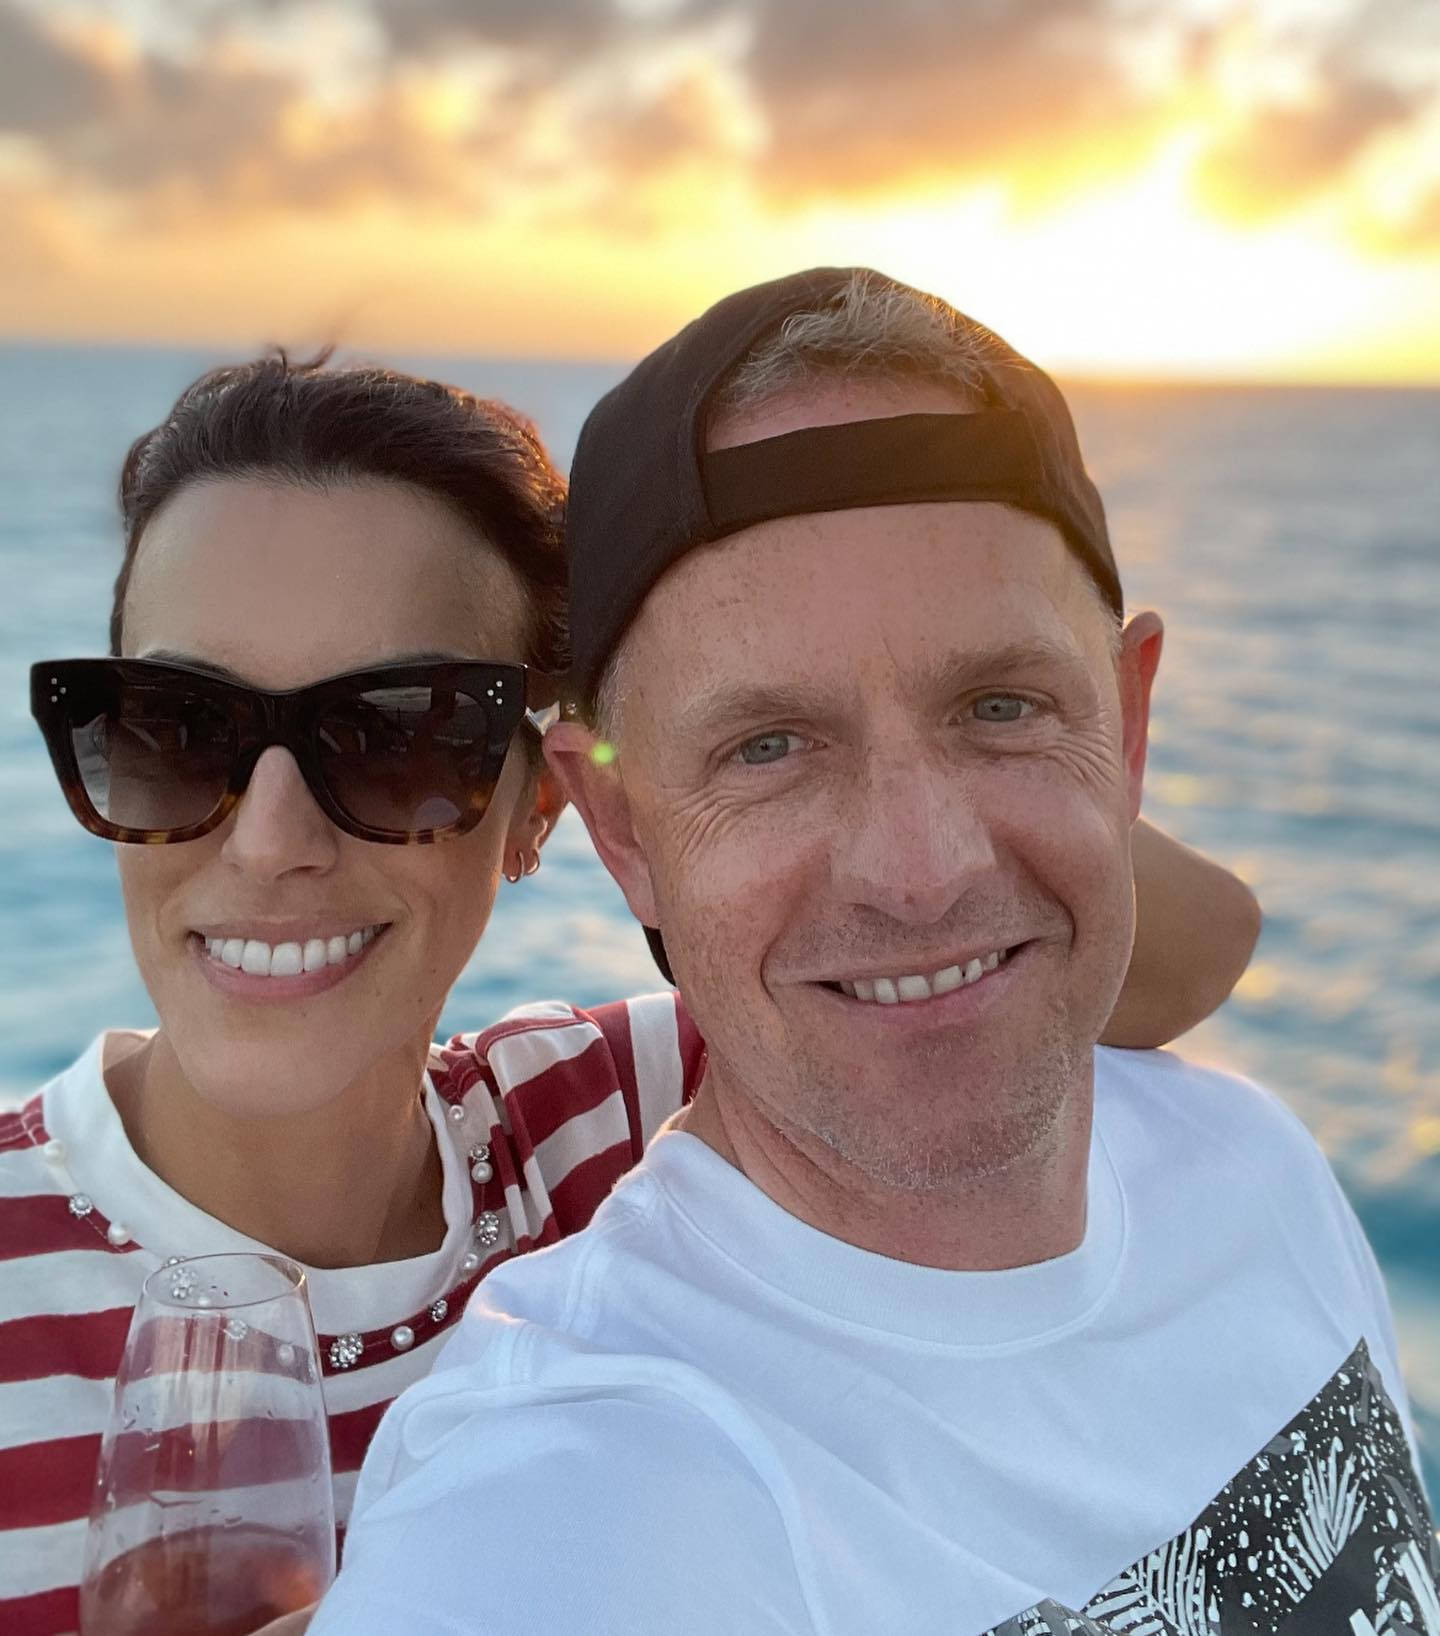 Luke Donald With Short-Haired Wife Wallpaper